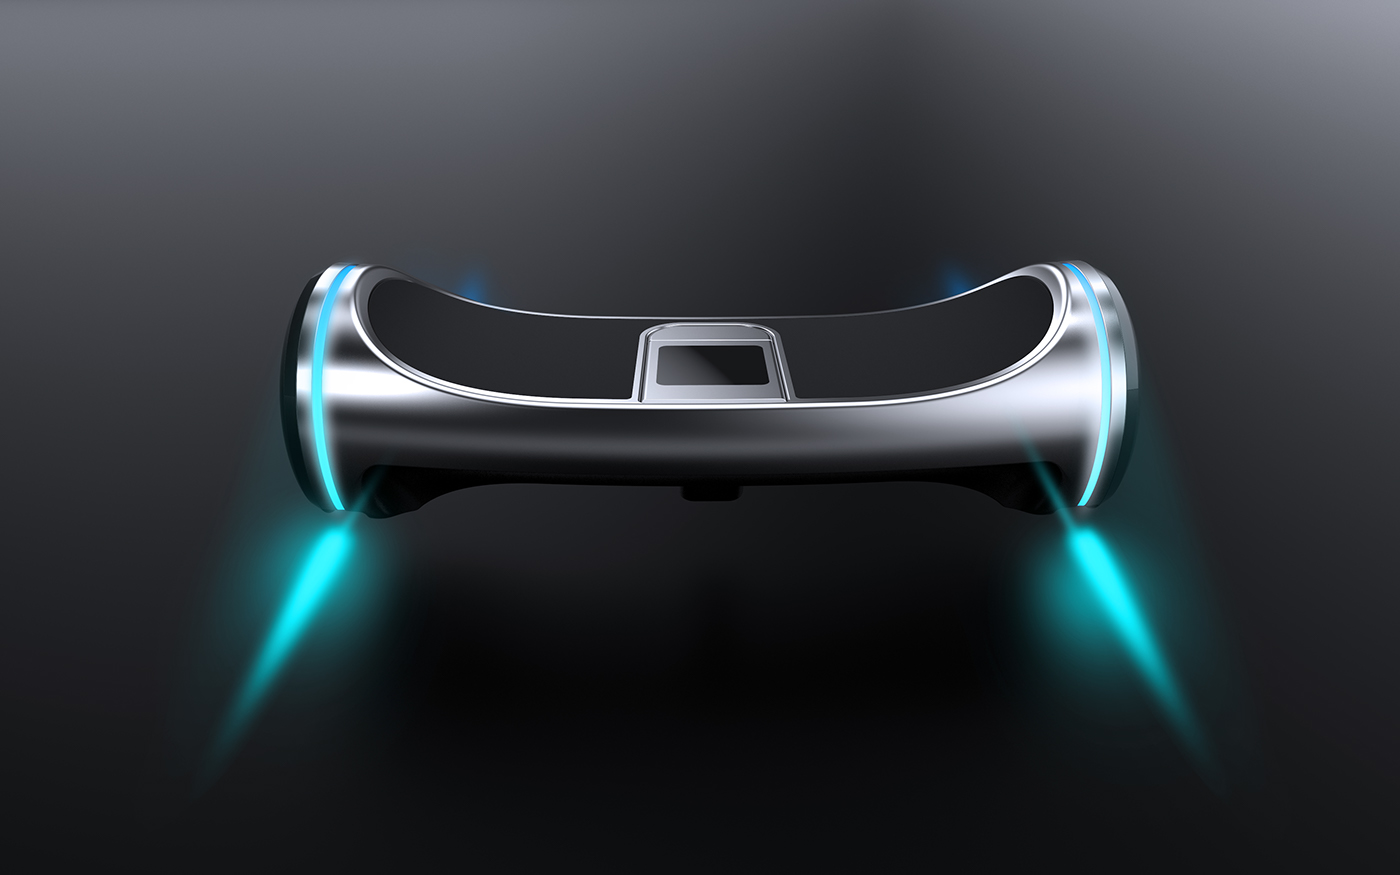 hoverboard design concept Project industrial product transportation Vehicle Technology minimal